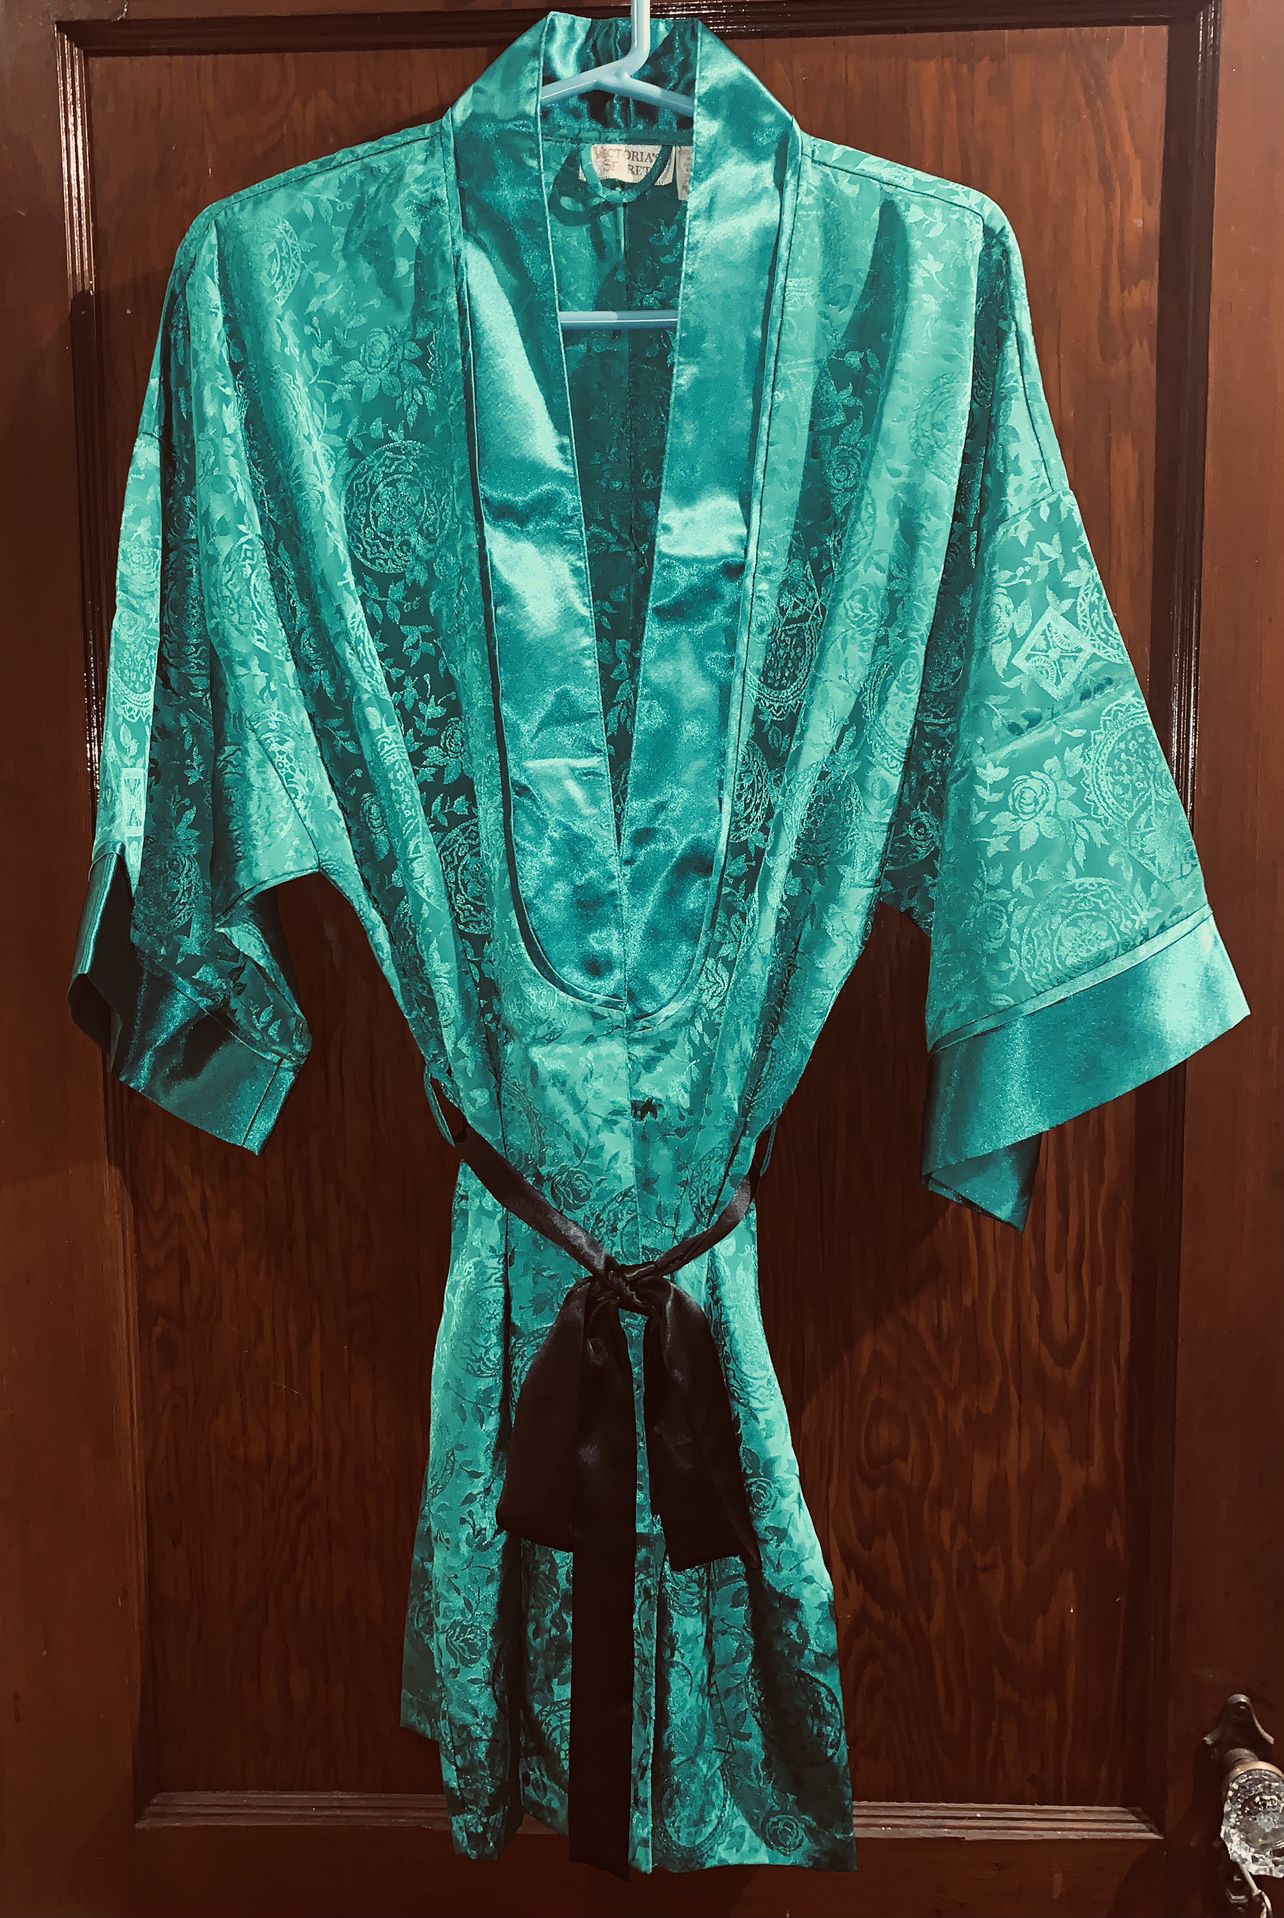 VICTORIA’S SECRET WOMENS SEXY LOUNGING WEAR EMERALD GREEN ONE SIZE FITS ALL OPEN BOX UNUSED SMOKE & PET FREE ENVIRONMENT  IMPRESSIVE ROBE